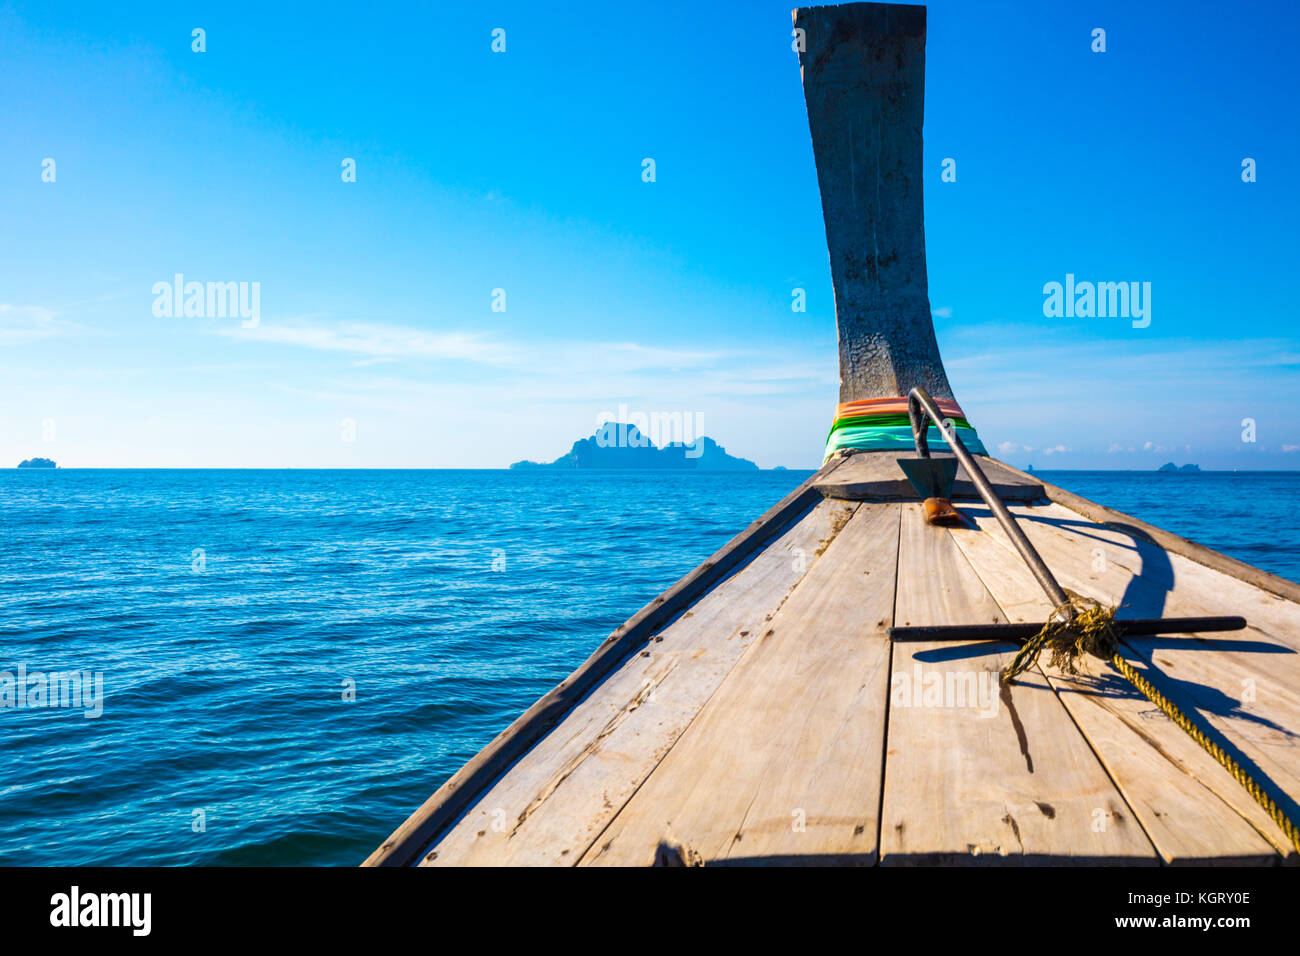 Longtail Boat In Sea At Aonang Beach Against Blue Sky Stock Photo